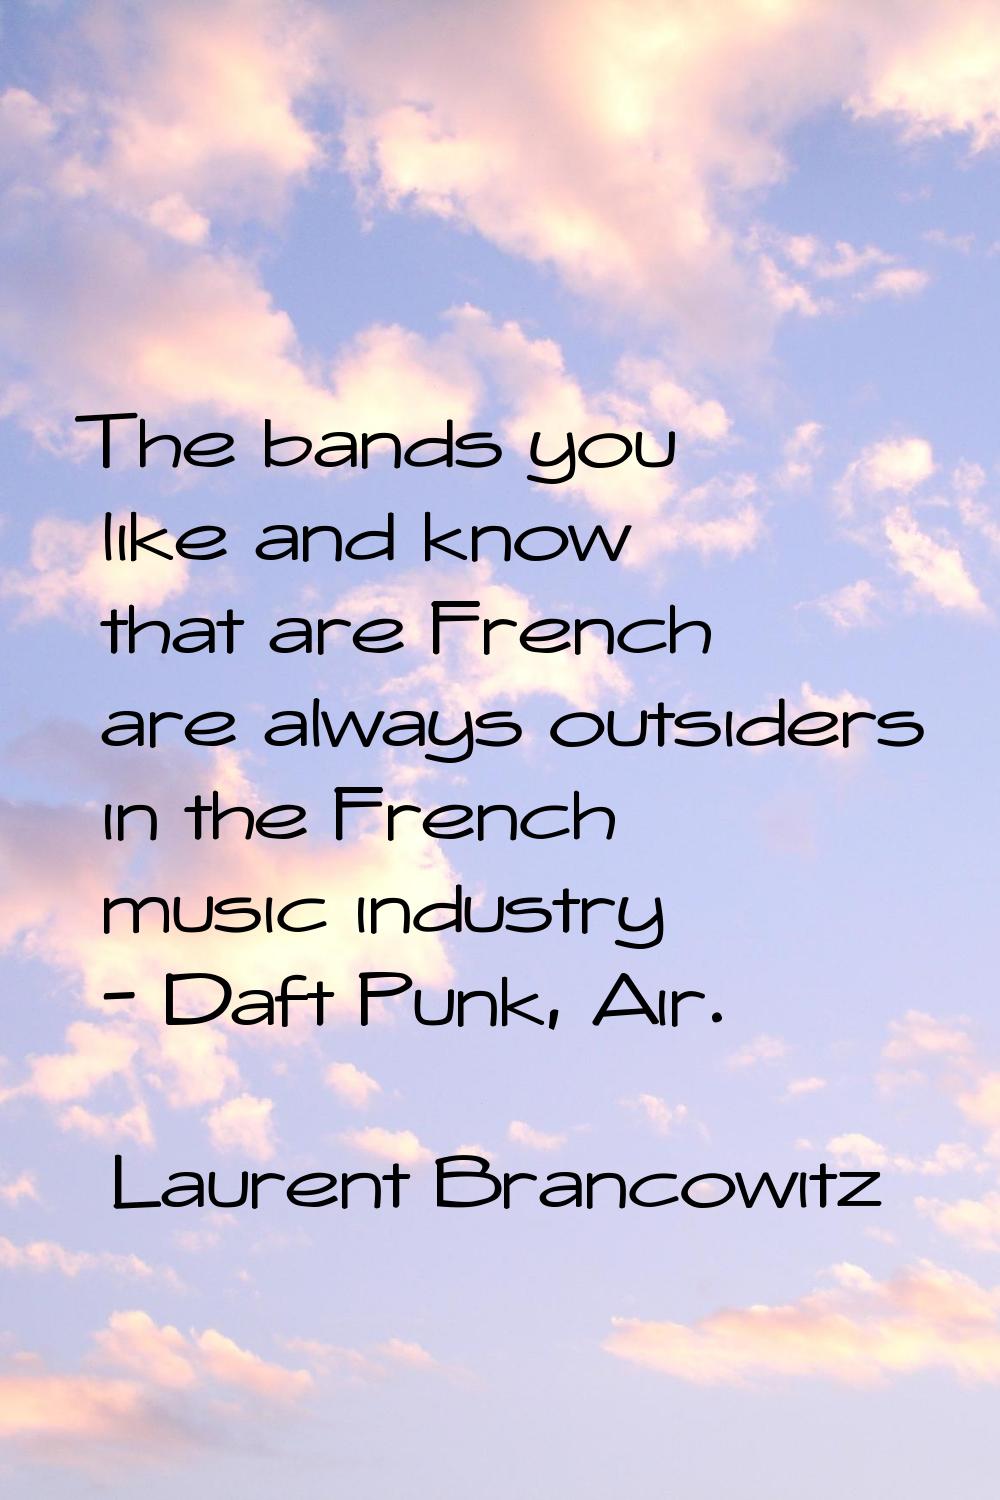 The bands you like and know that are French are always outsiders in the French music industry - Daf